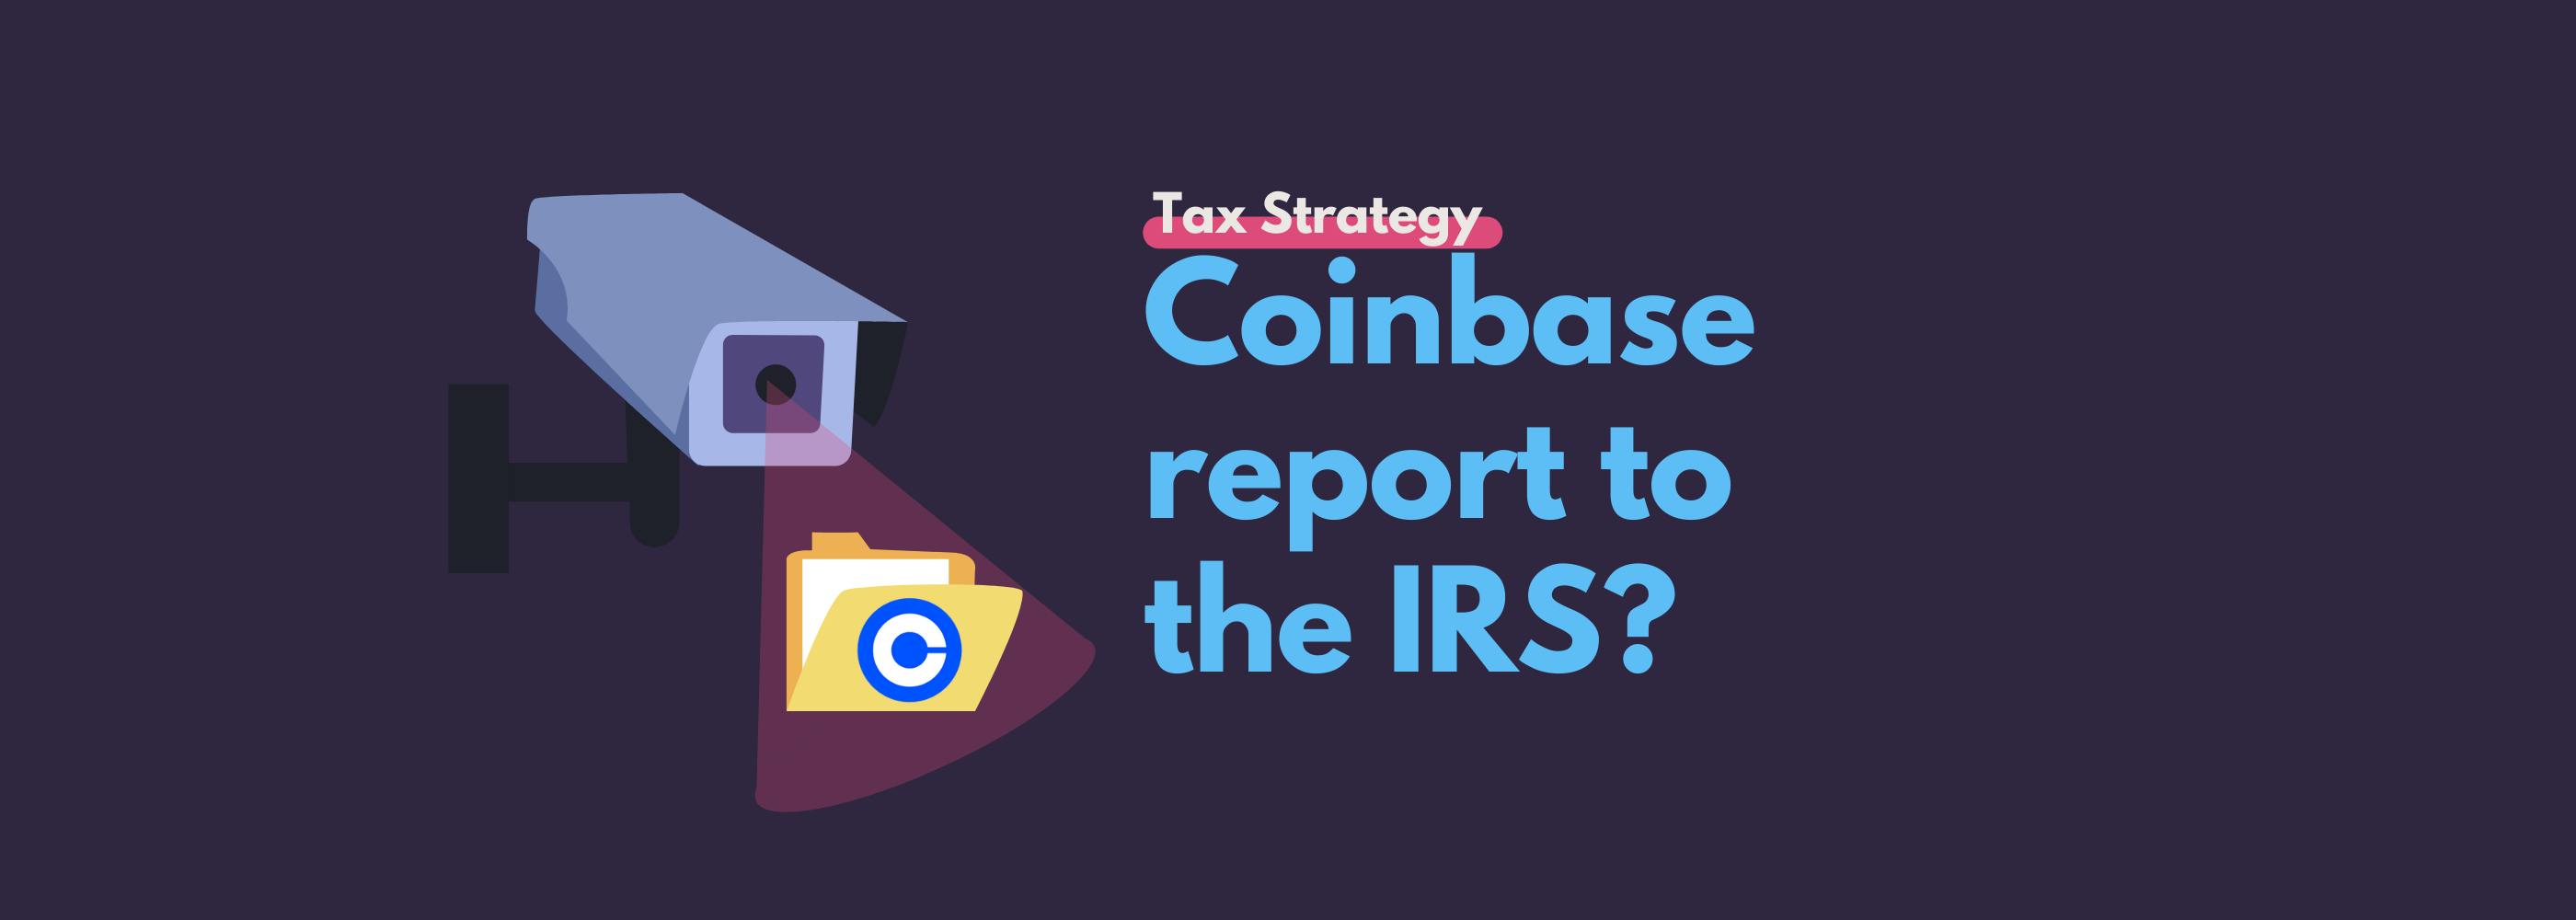 Does Coinbase Report the IRS